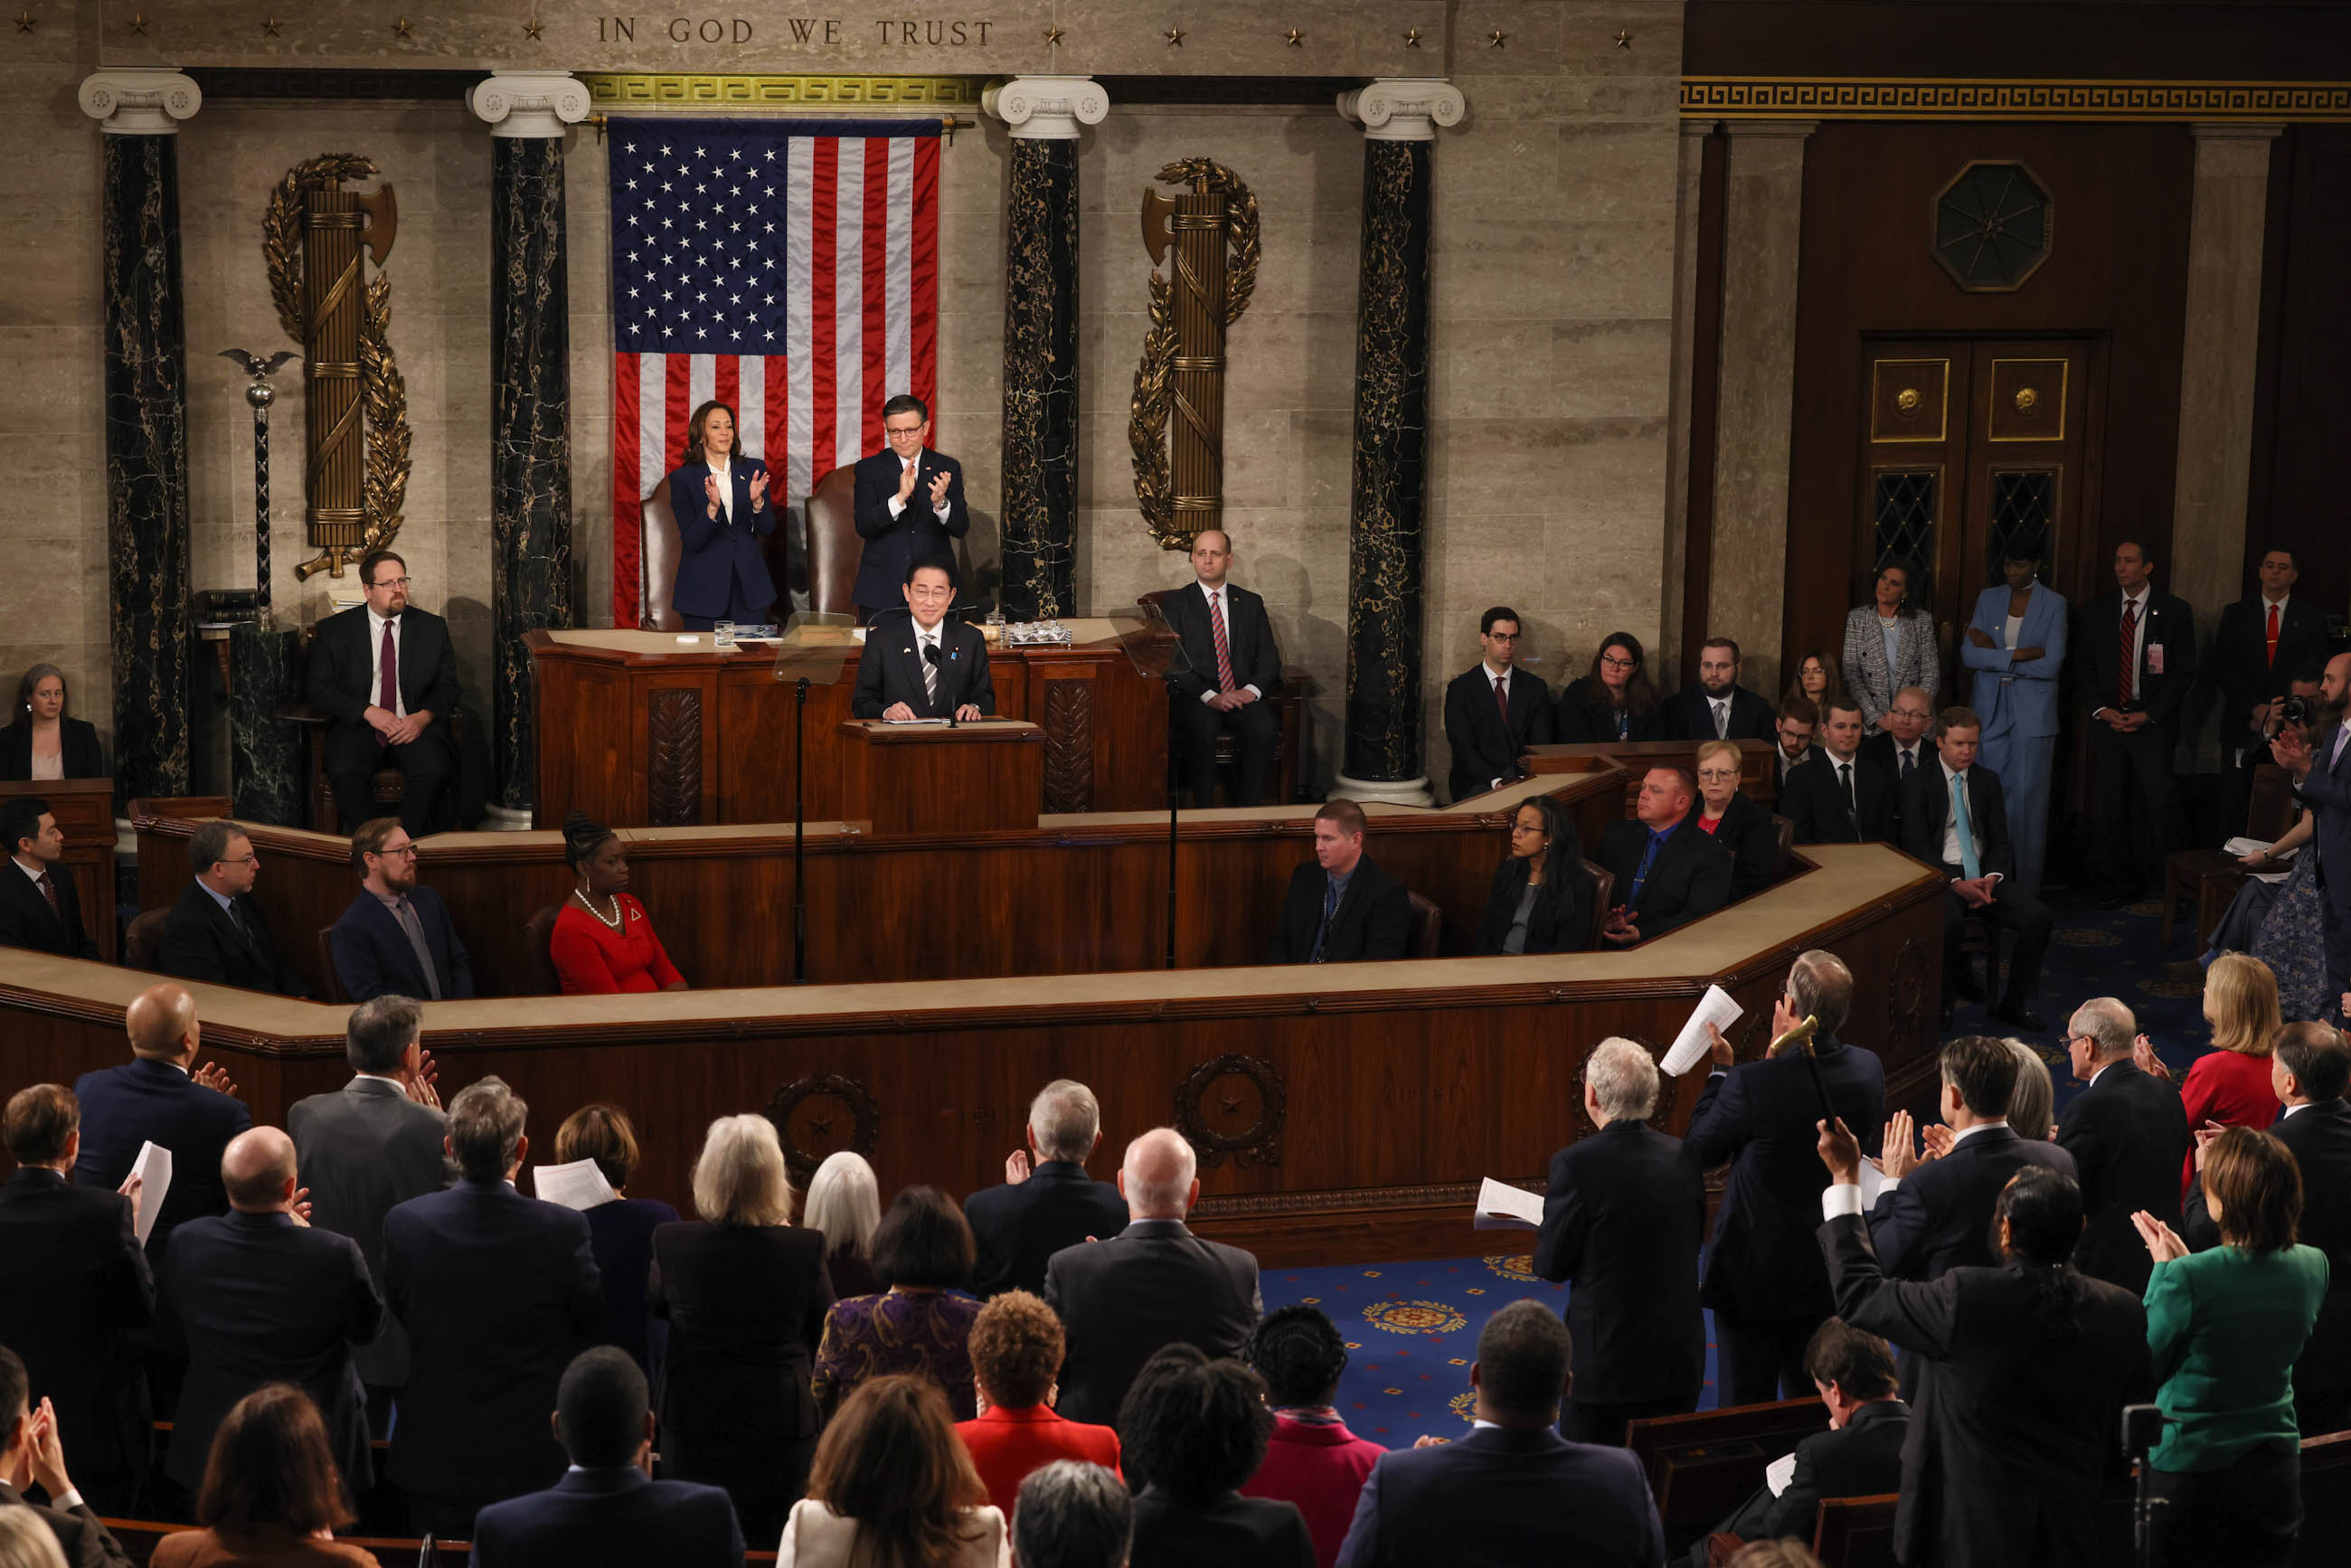 Prime Minister Kishida delivering an address at a Joint Meeting of the United States Congress (3)